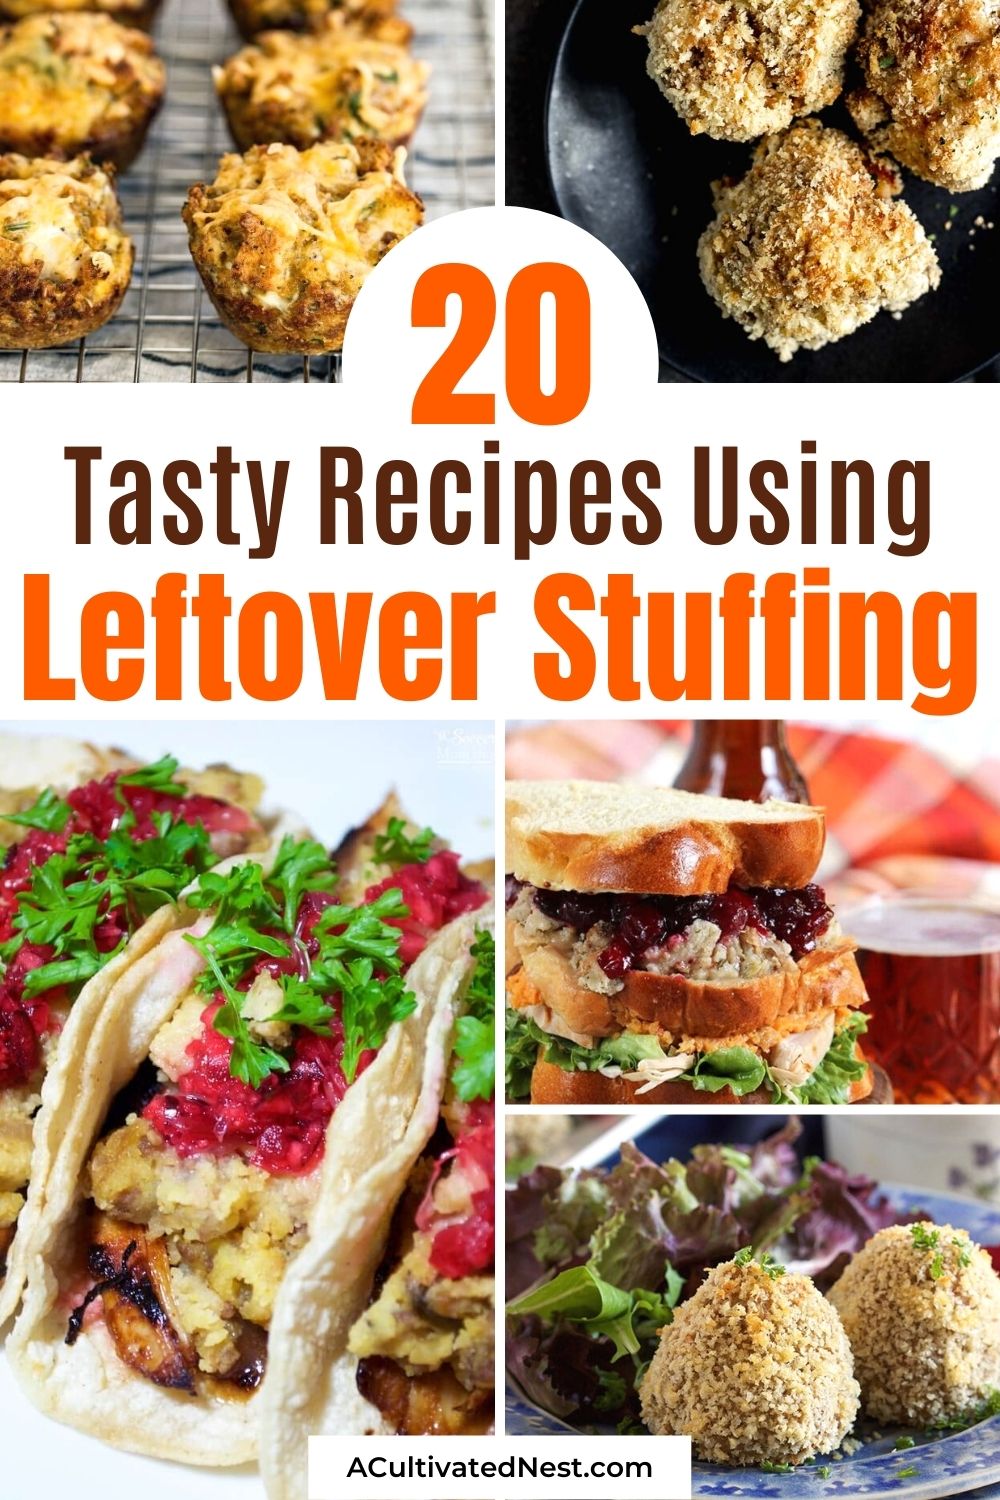 20 Tasty Recipes to Use Up Leftover Stuffing- If you have extra stuffing leftover from the holidays, there are many delicious ways to use it! Here are some tasty recipes to use up leftover stuffing that you need to try! | ways to use leftover Thanksgiving stuffing, #recipeIdeas #ThanksgivingLeftovers #recipes #leftoverStuffing #ACultivatedNest